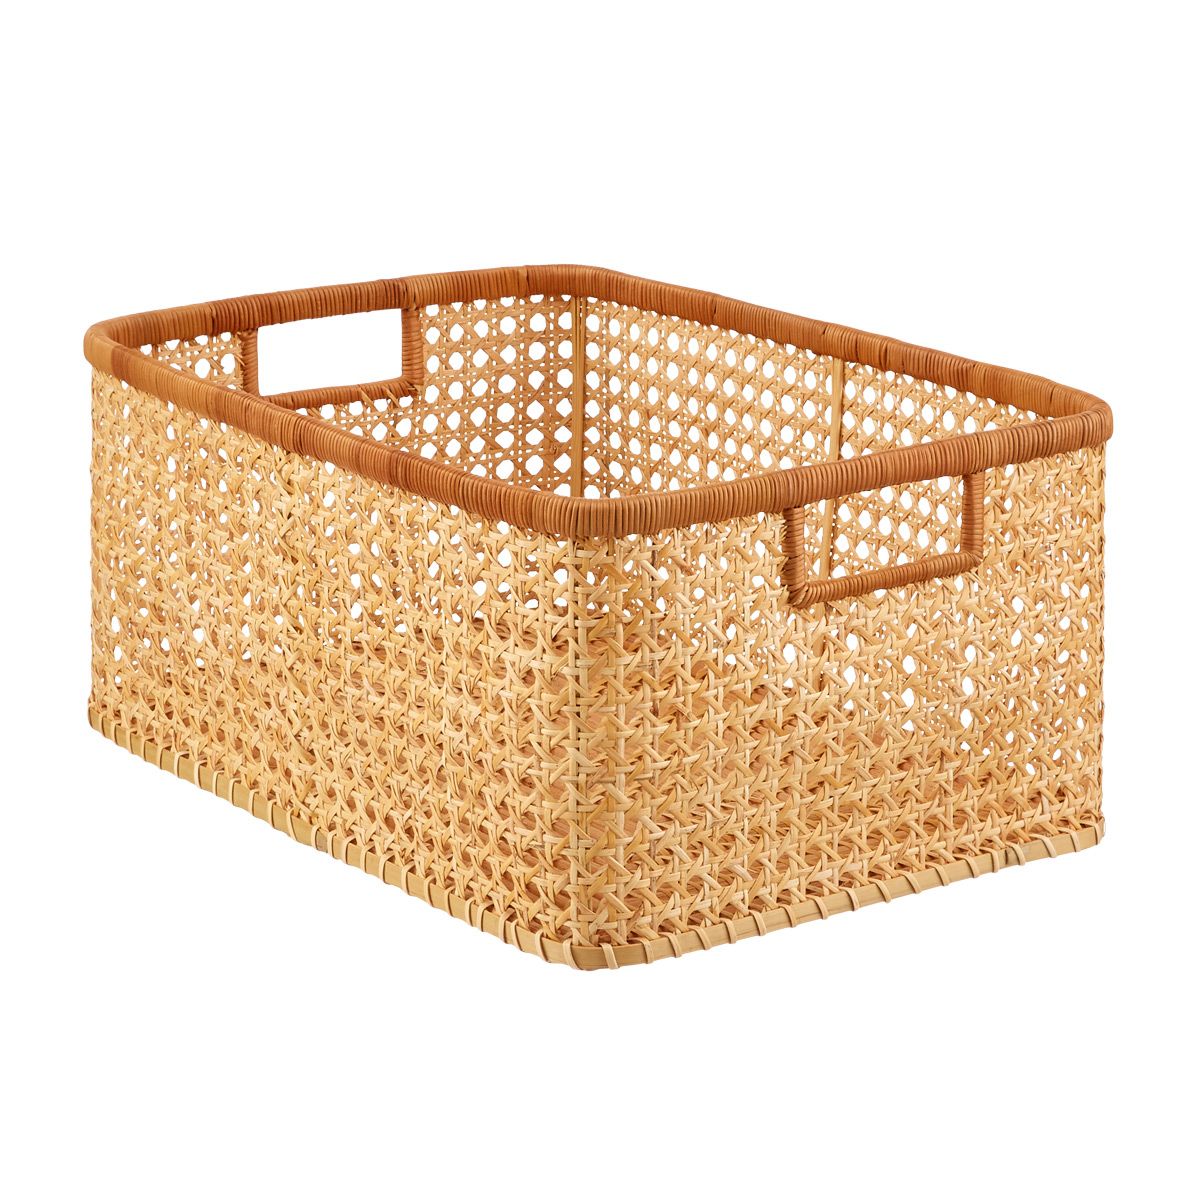 Albany Cane Rattan Bin | The Container Store